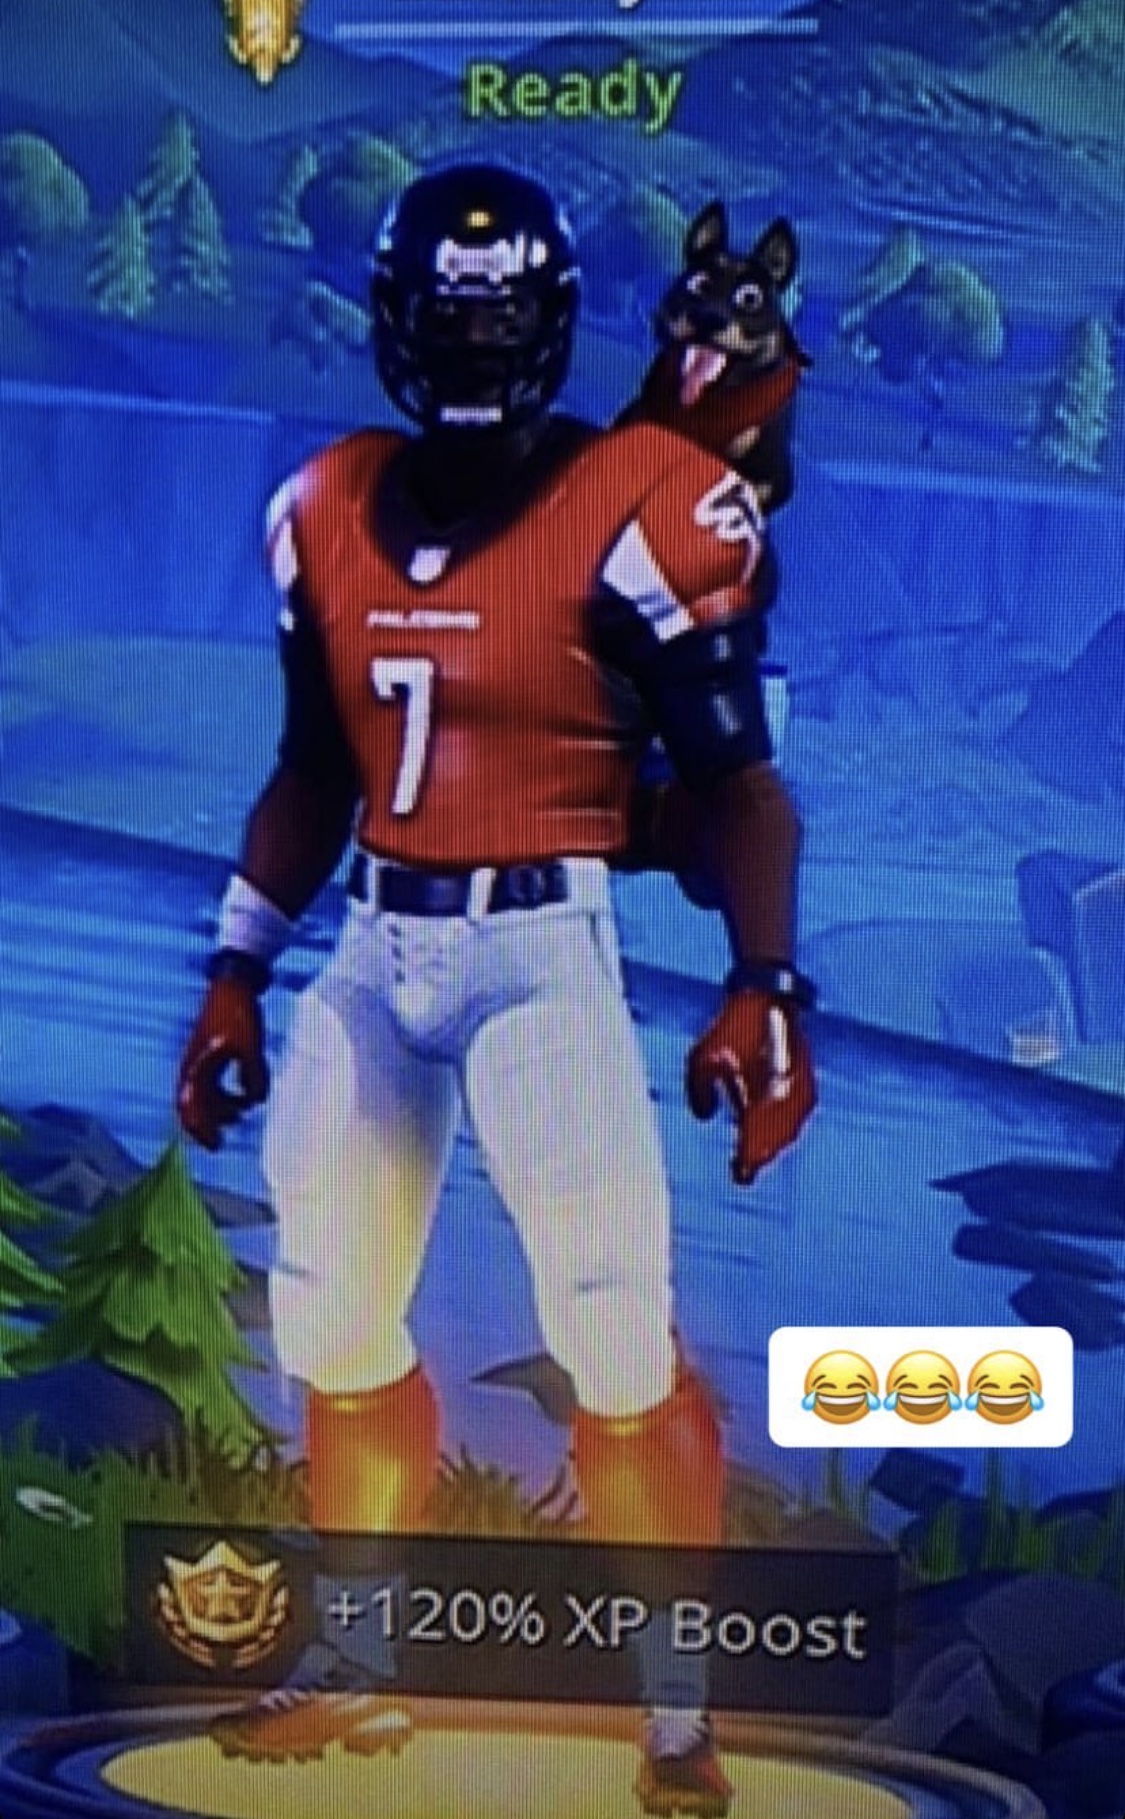 Here Are The Funniest NFL Fortnite Character Skins Fans ... - 1125 x 1819 jpeg 581kB